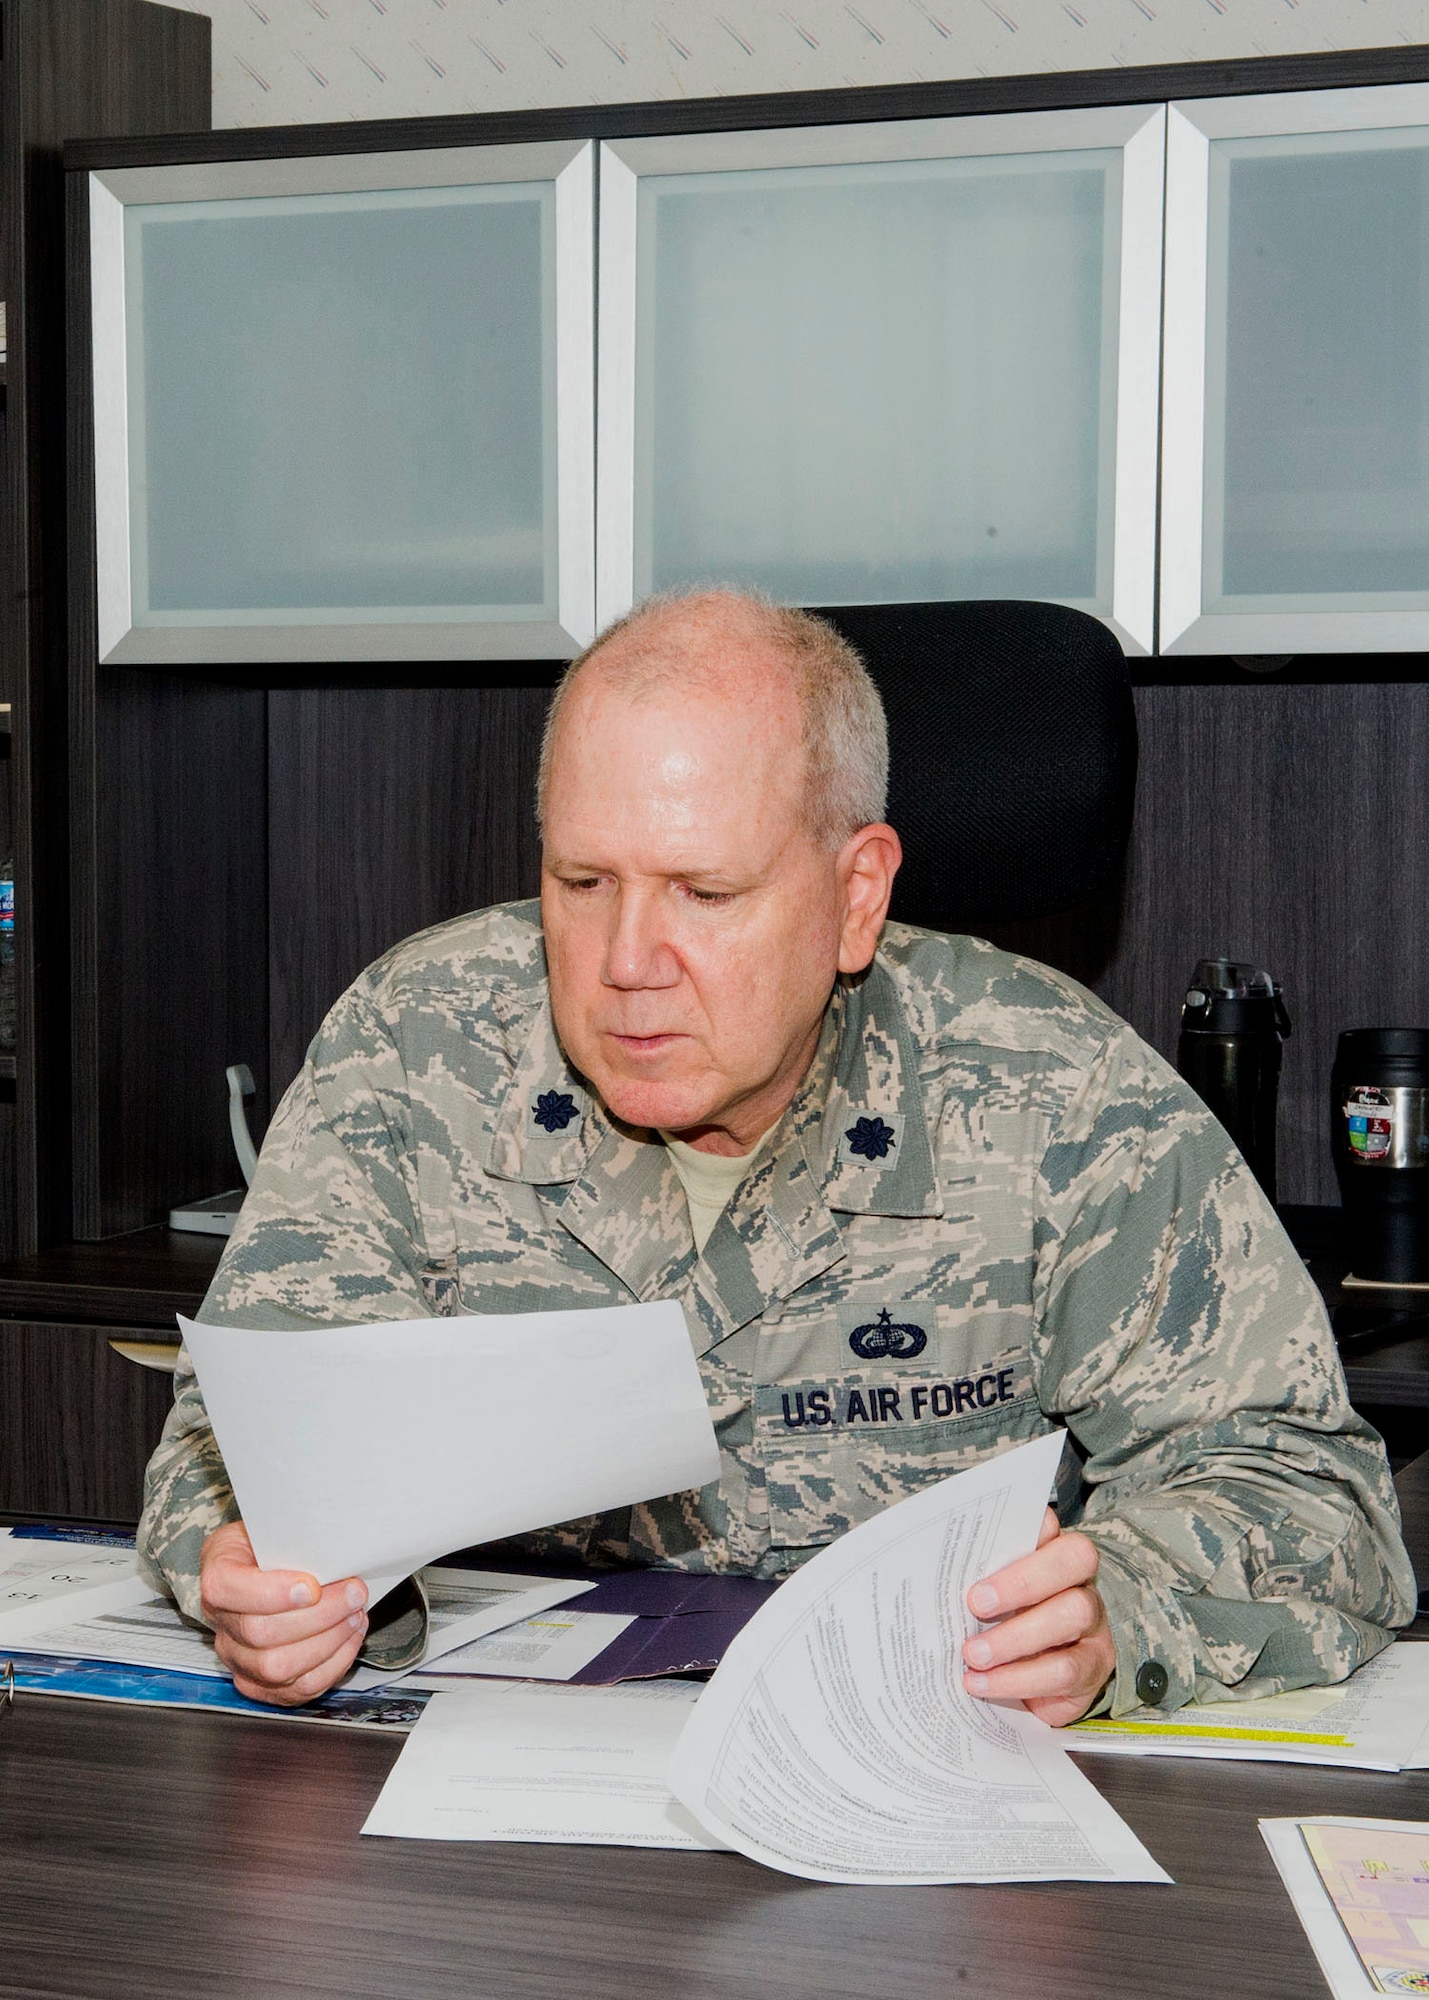 Lt. Col. Eric Kase reviews paperwork in his new office at Grissom Air Reserve Base, Ind., June 5, 2019. Kase recently became the operations officer for the 434th Force Support Squadron